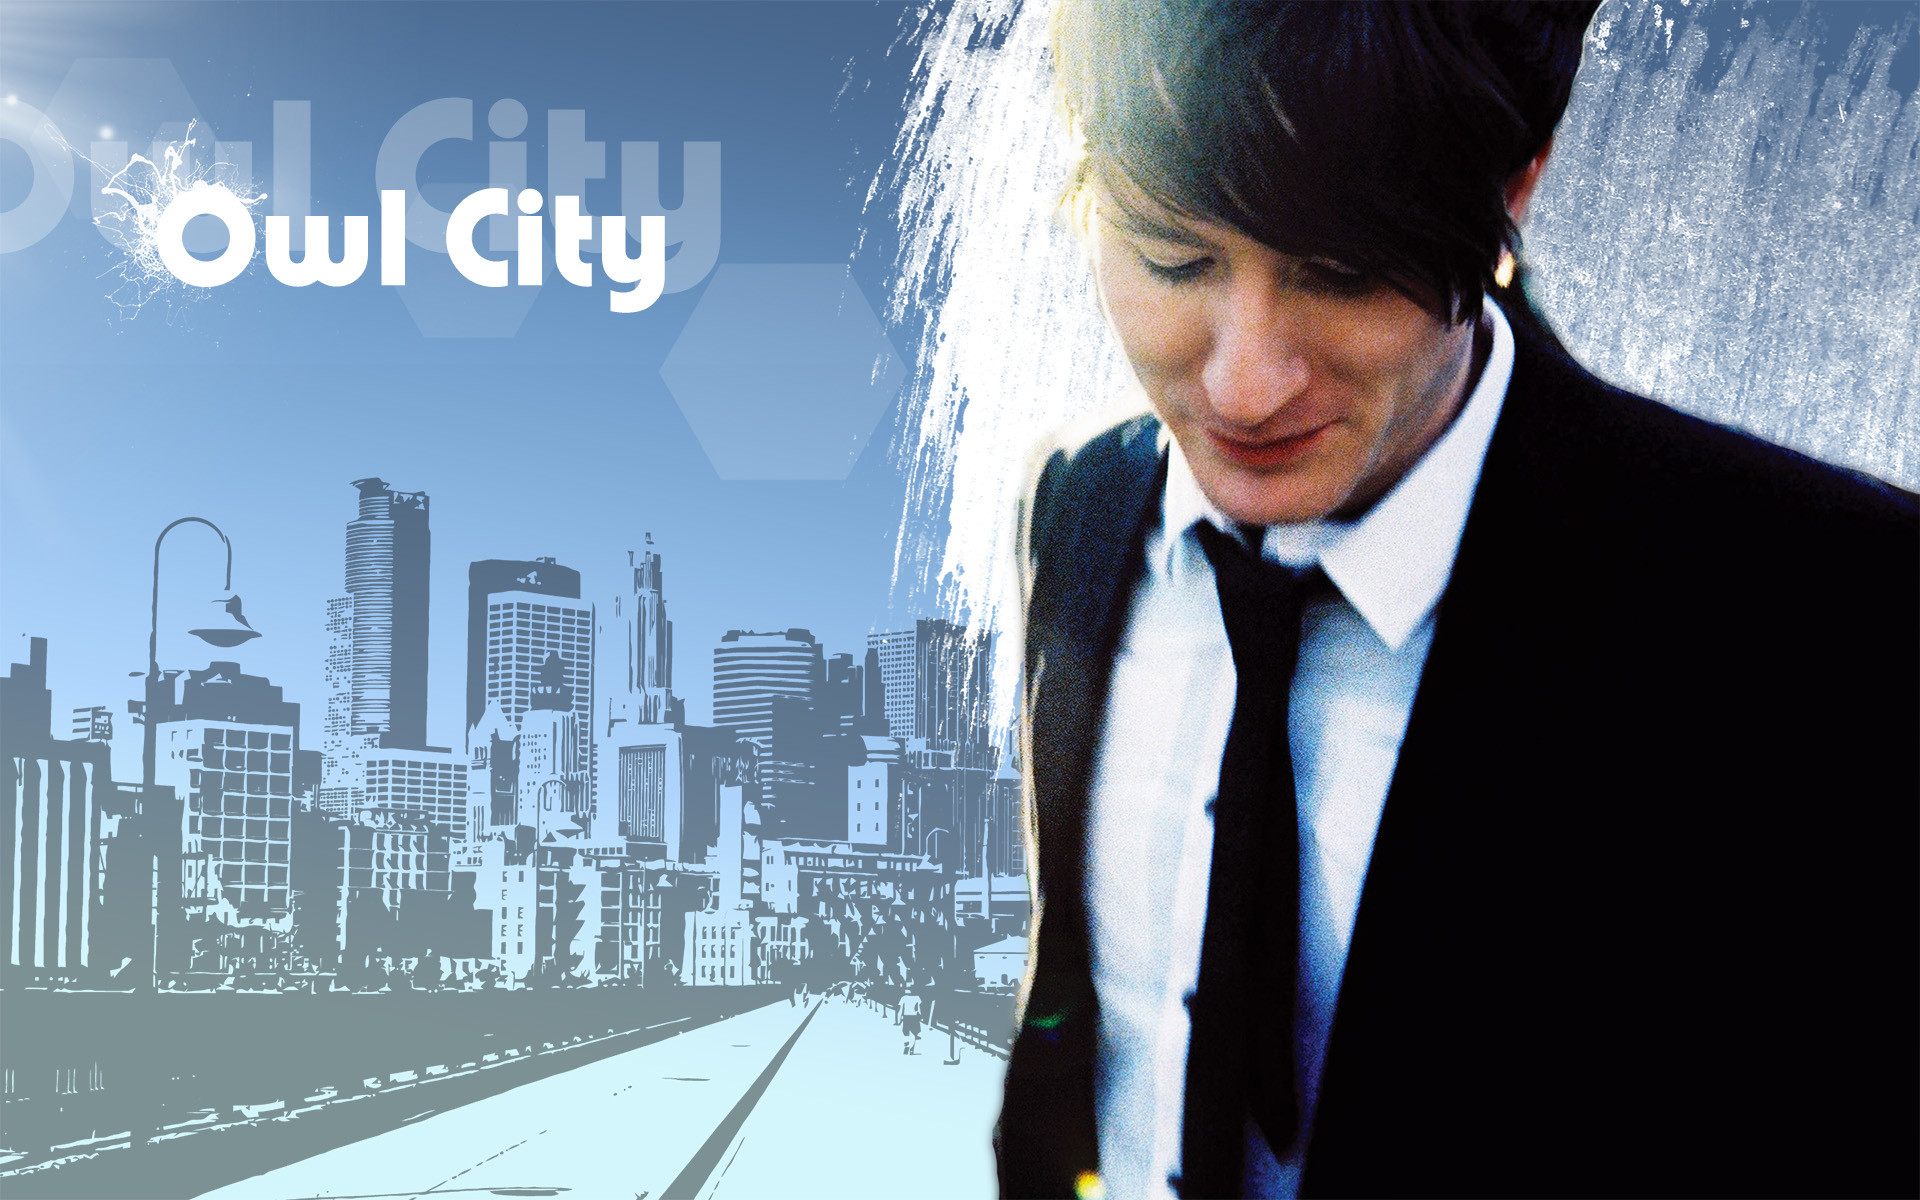 1920x1200 ... Owl City Adam Young 2 by Pchann